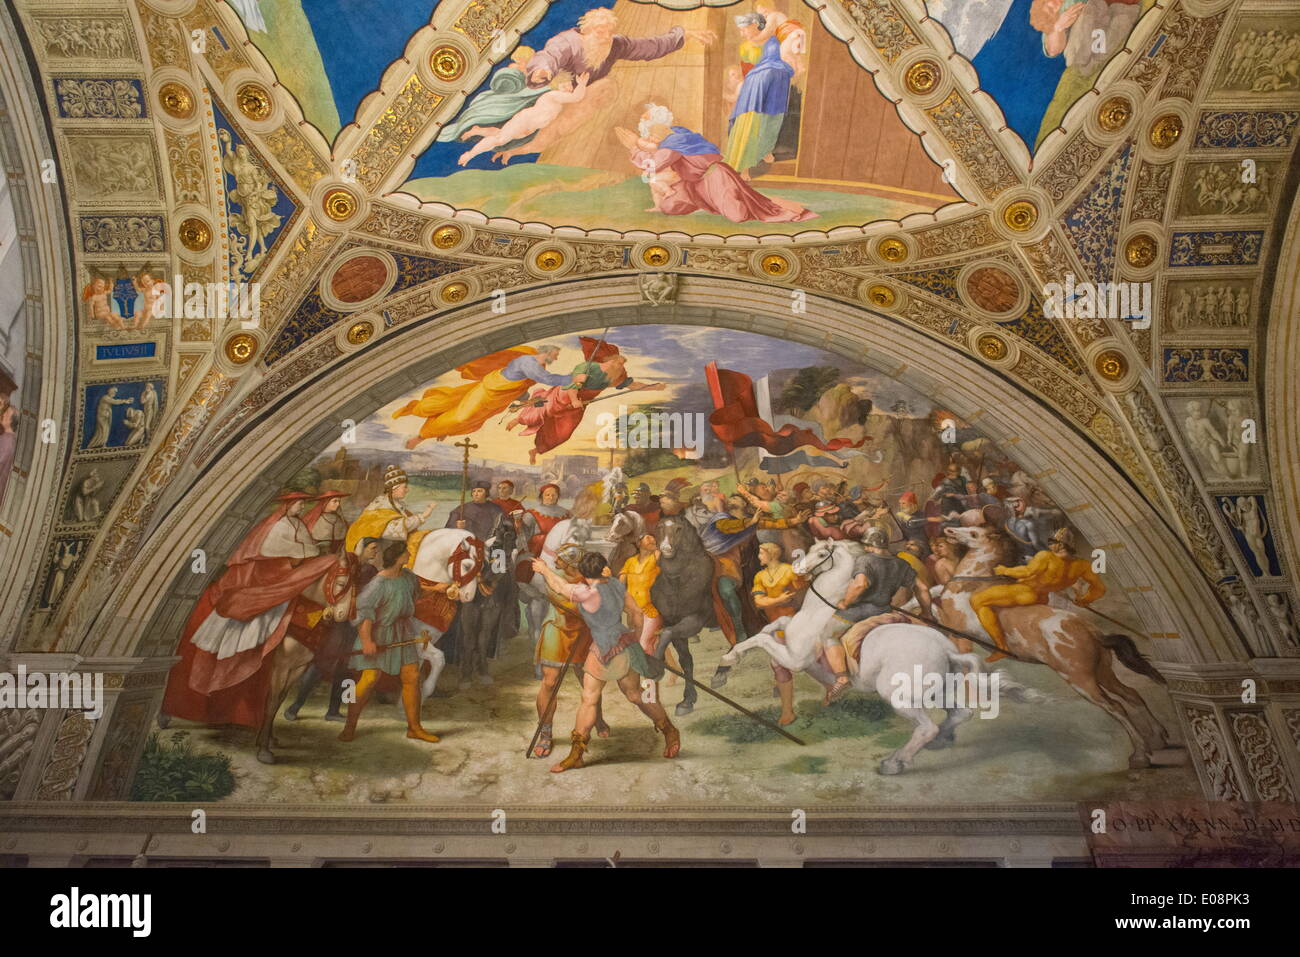 The Meeting of Leo I and Attila by Raphael, in the Stanze di Raffaello, in the Apostolic Palace in the Vatican, Vatican Museums, Rome, Lazio, Italy, Europe Stock Photo